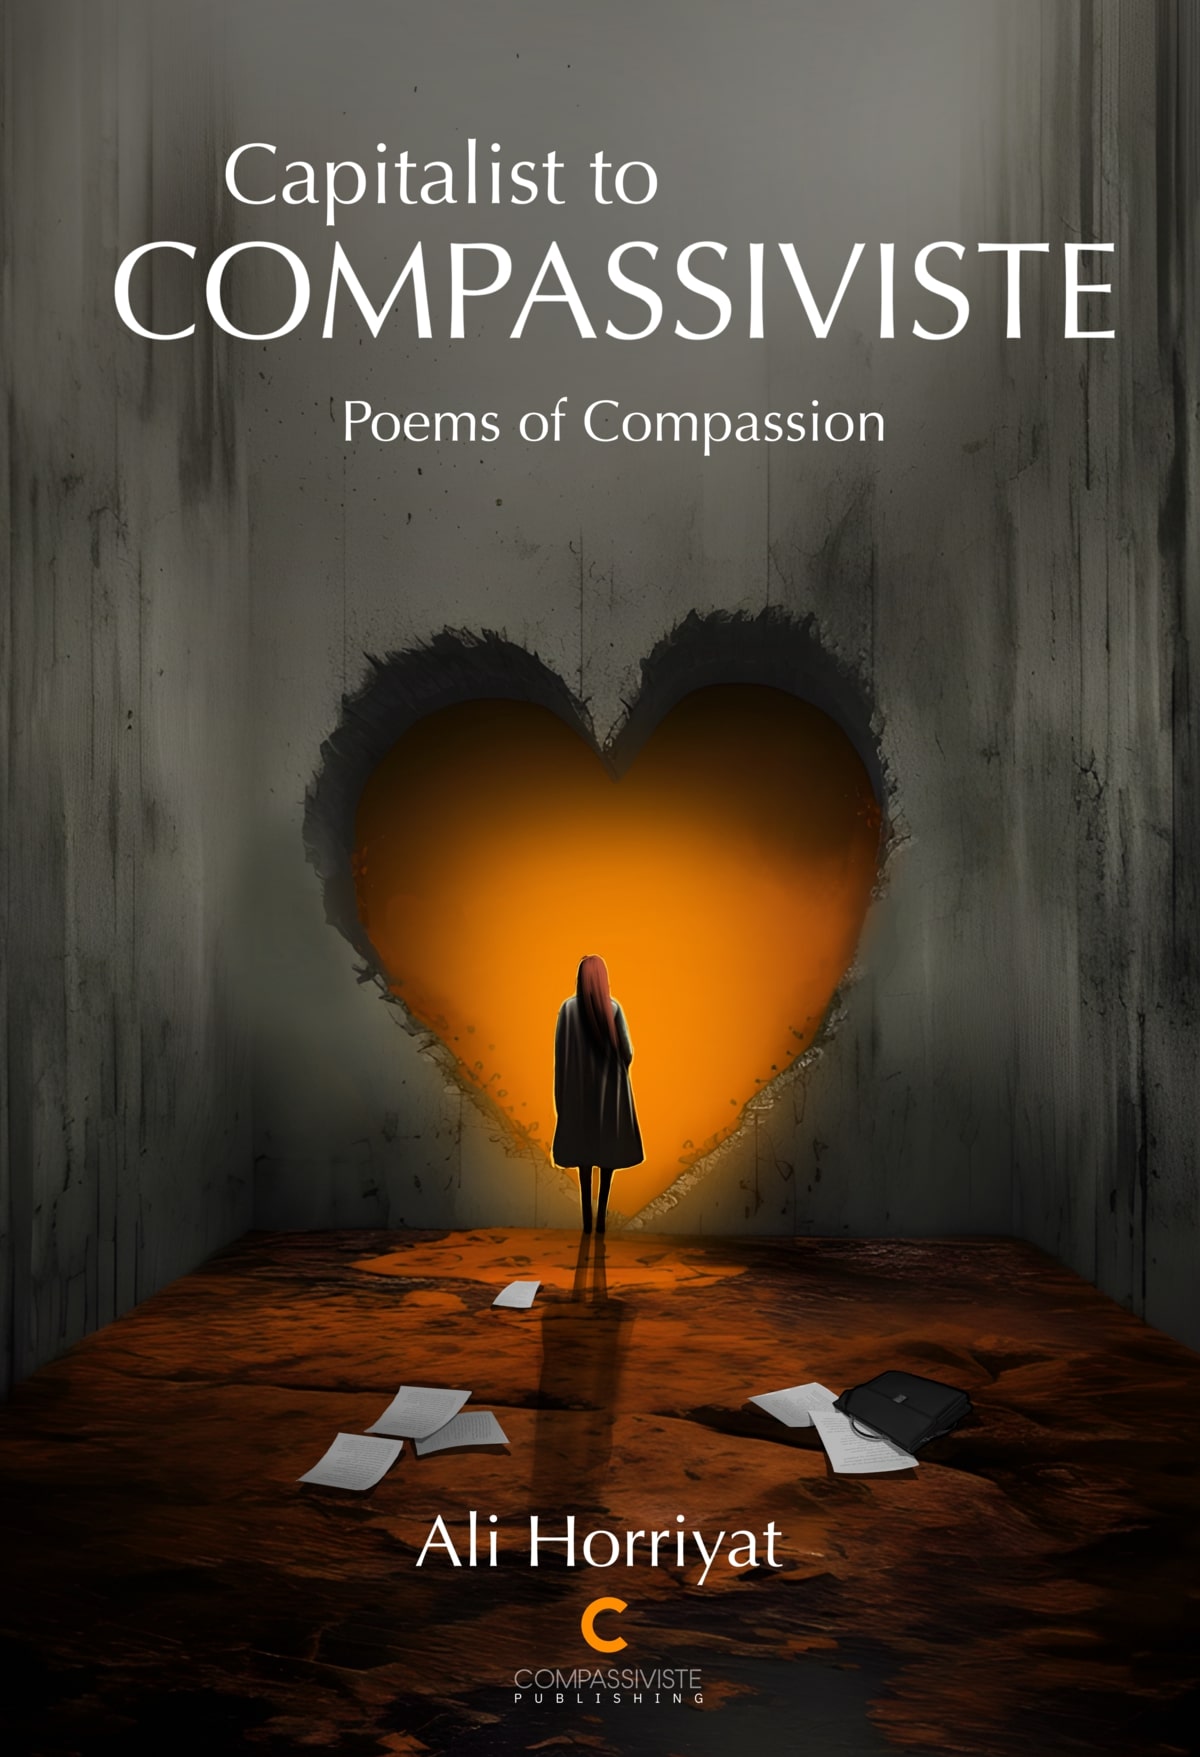 Book cover of Capitalist to Compassiviste by Ali Horriyat